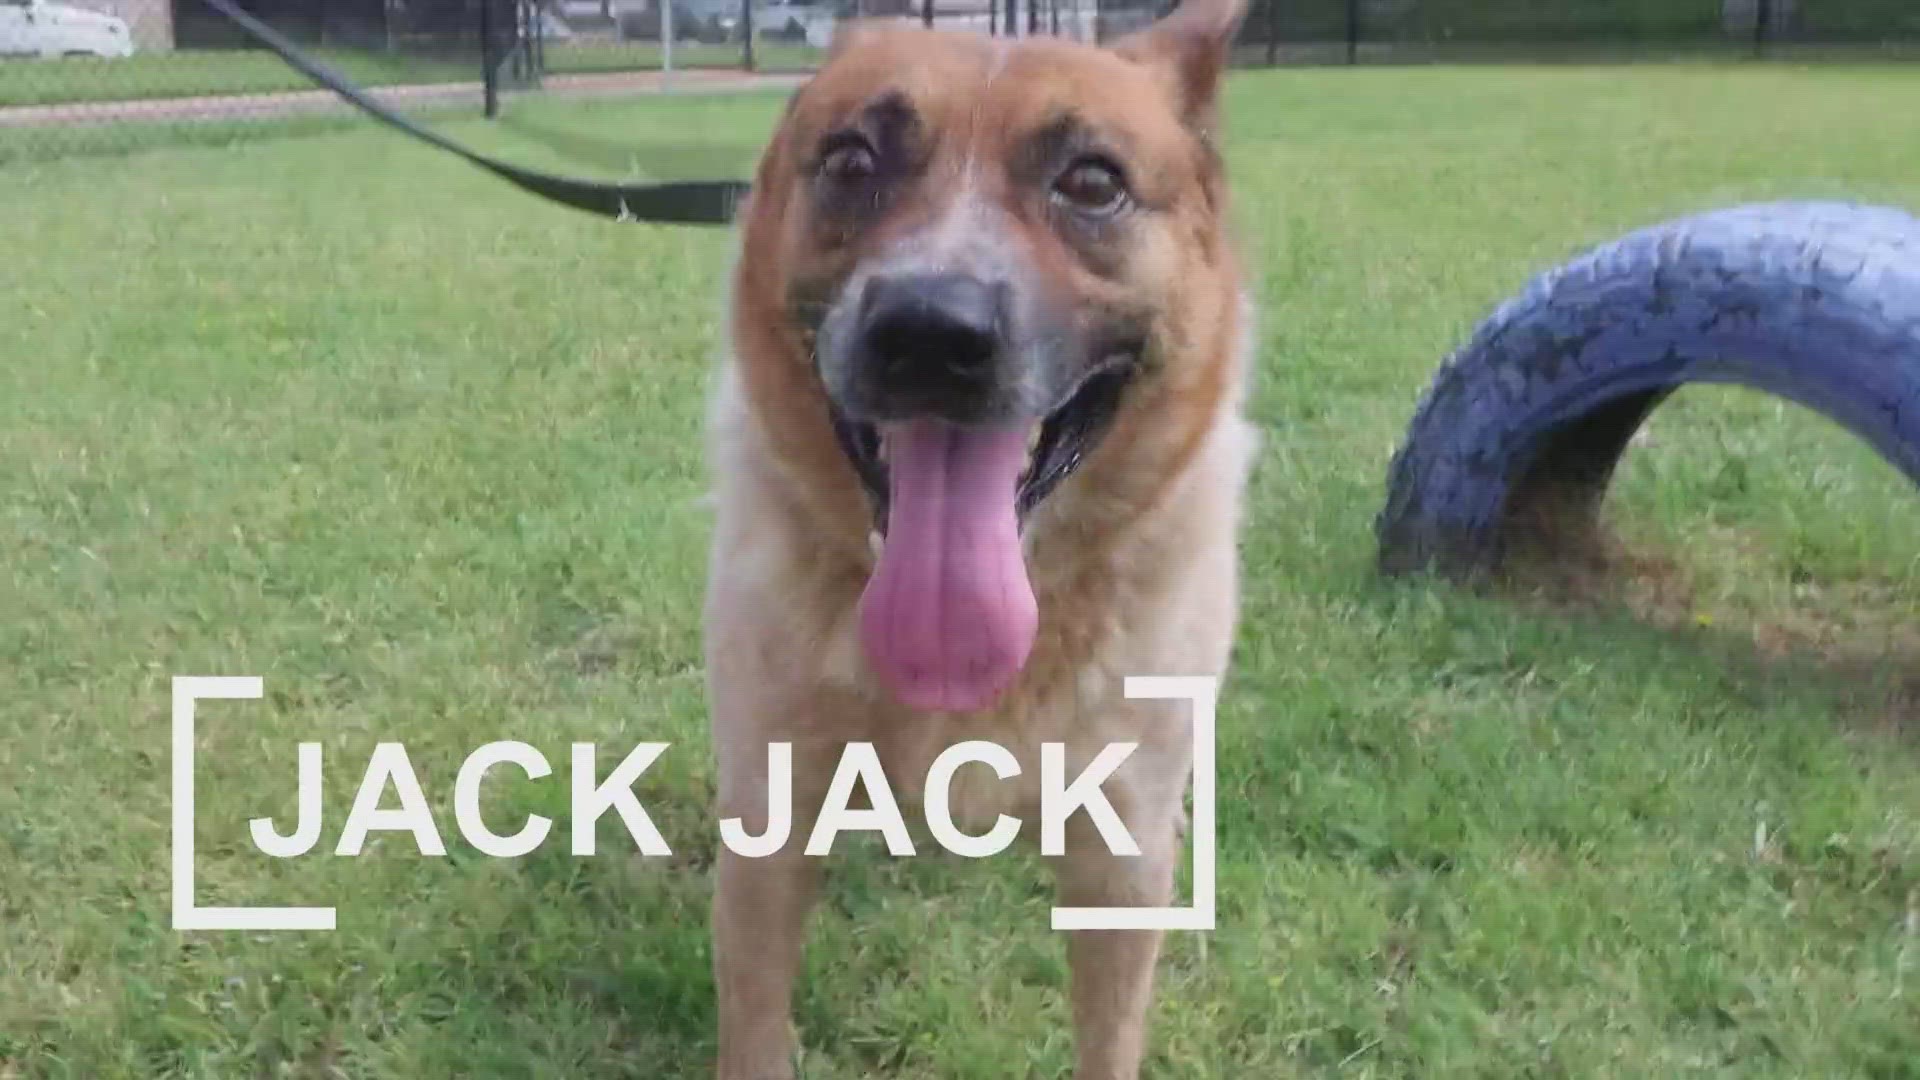 Jack Jakc is looking for his fur-ever home!